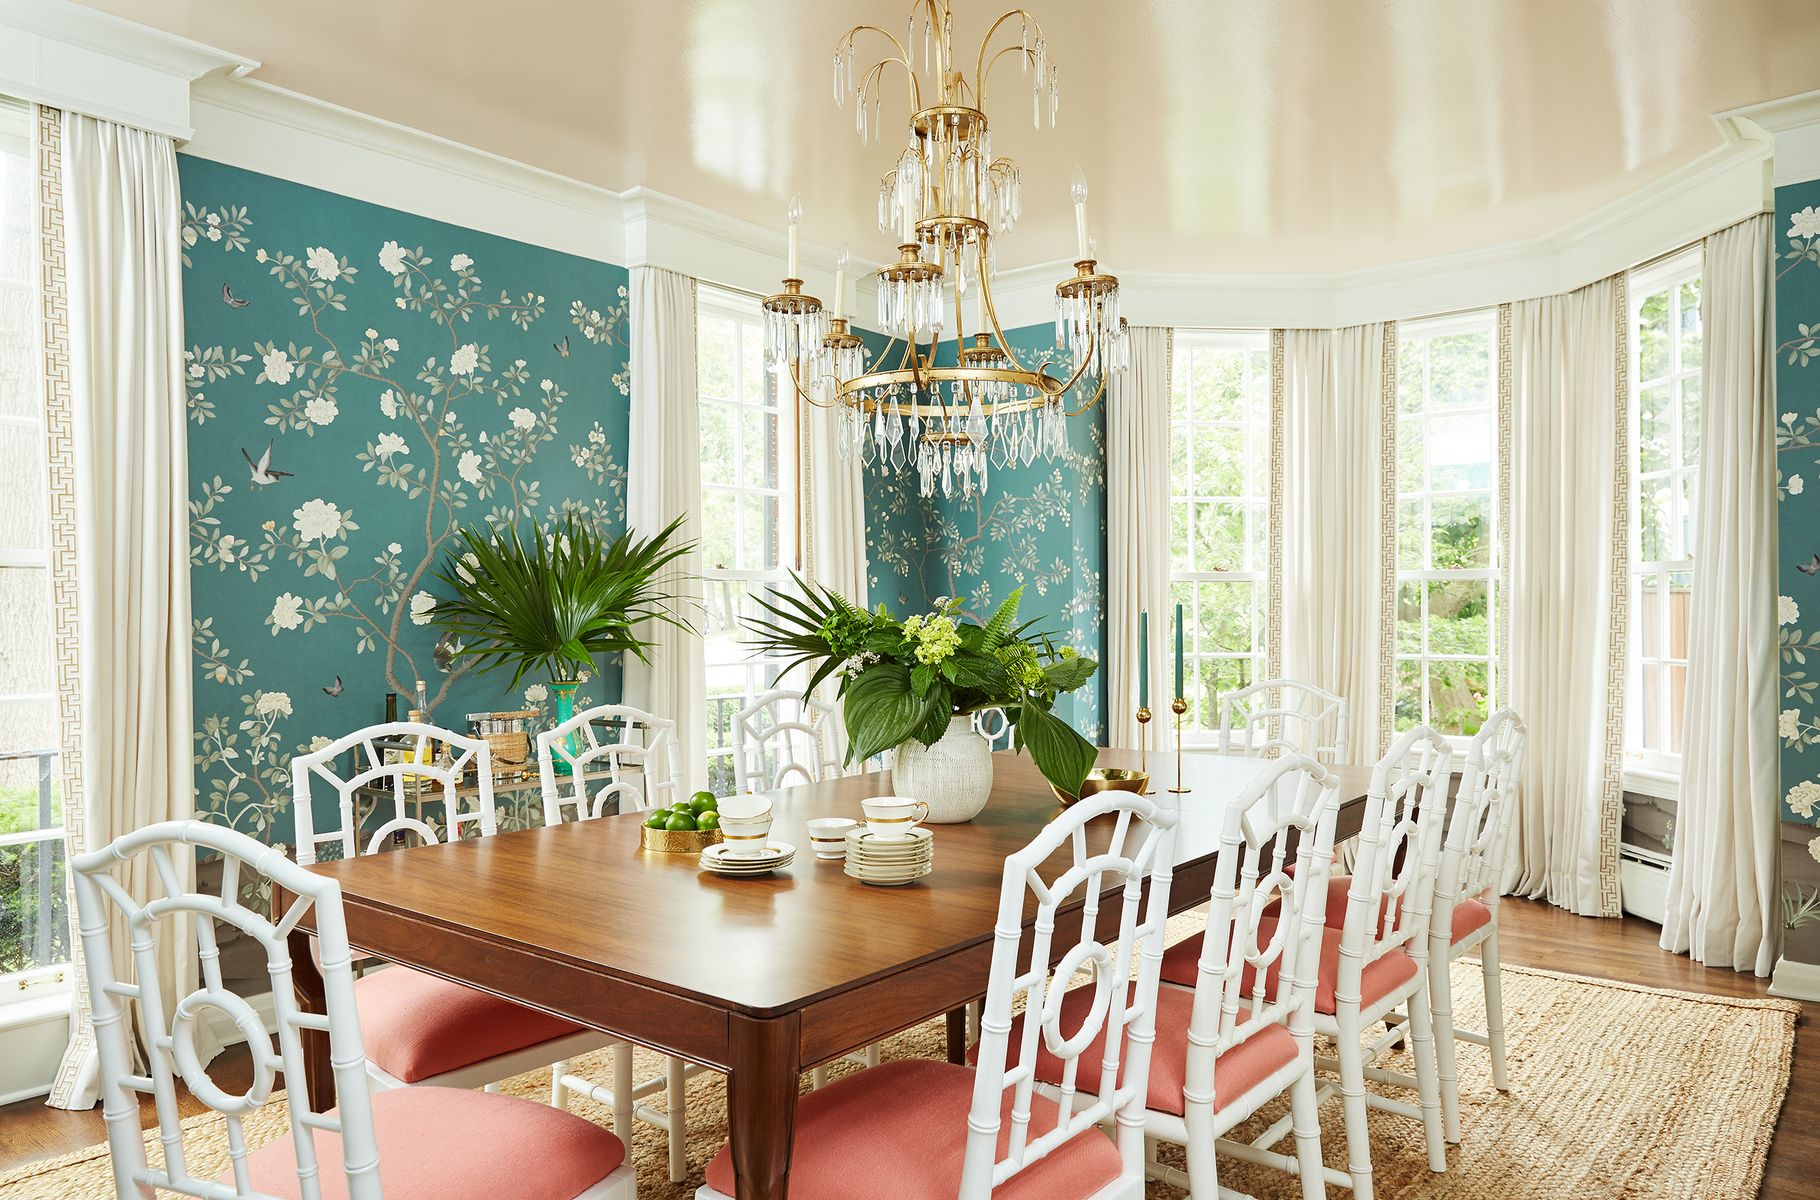 Tropical Dining Chairs via amiecorley